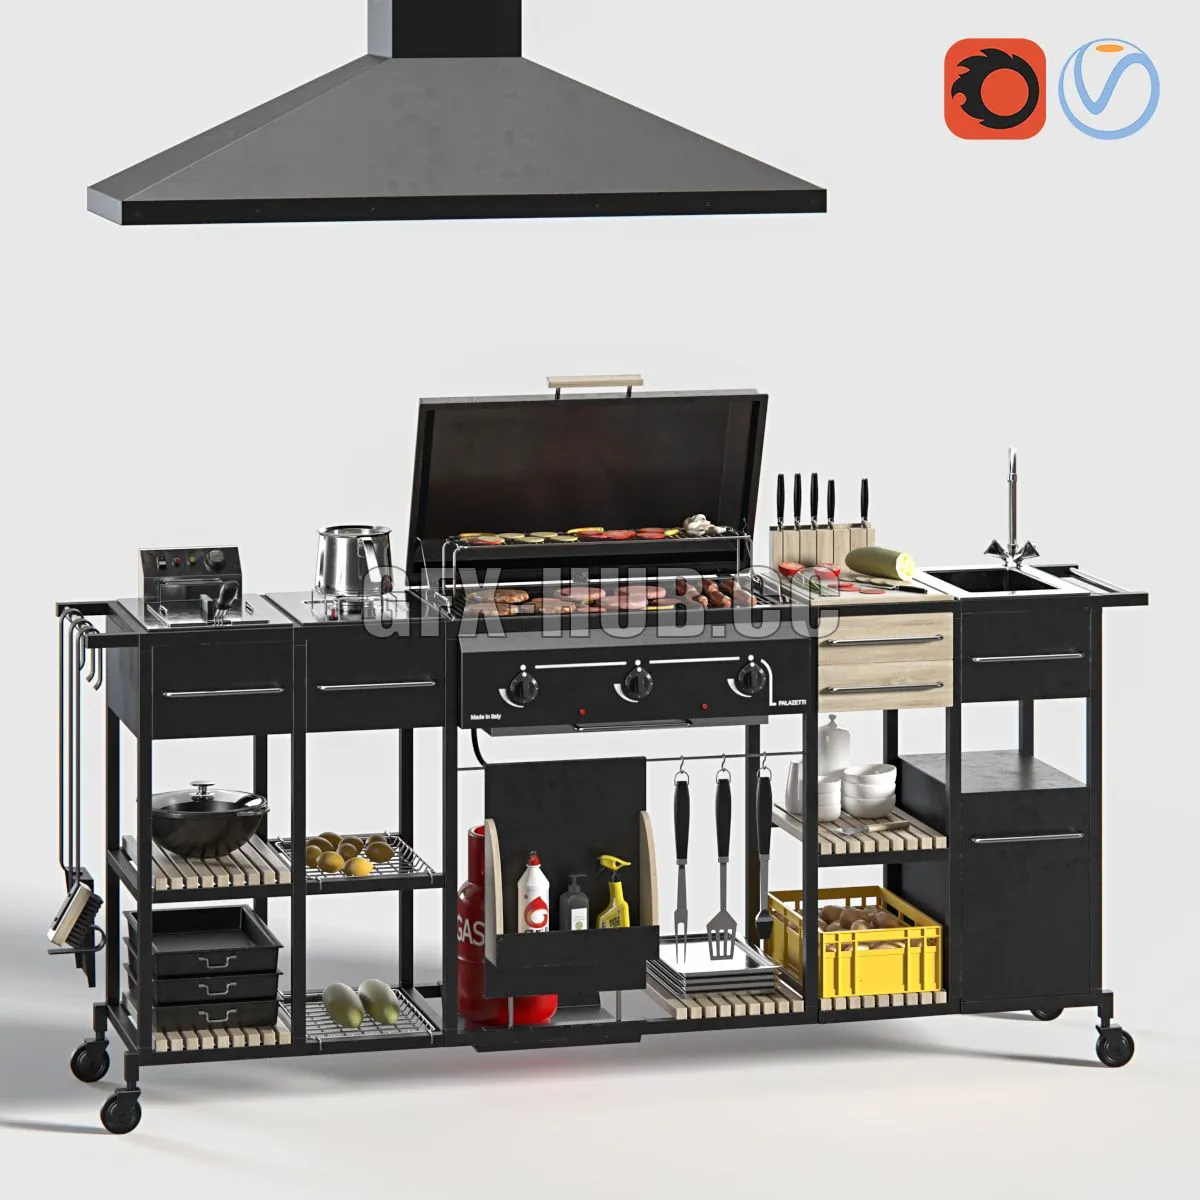 FURNITURE 3D MODELS – Gas Grill Mr Chef